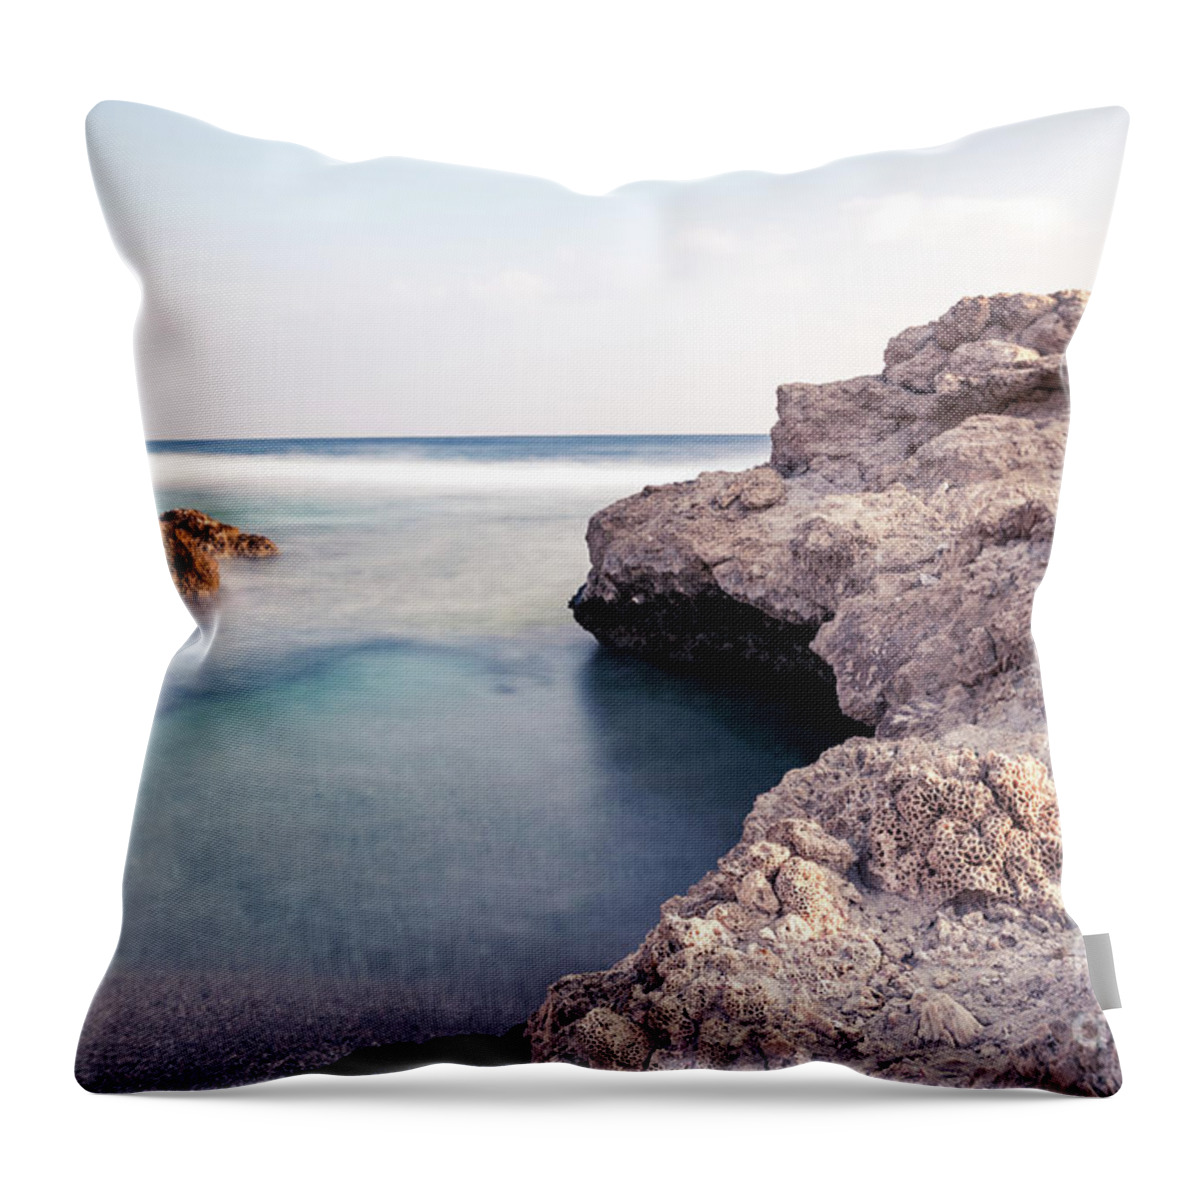 Africa Throw Pillow featuring the photograph The Reef And The Sea by Hannes Cmarits